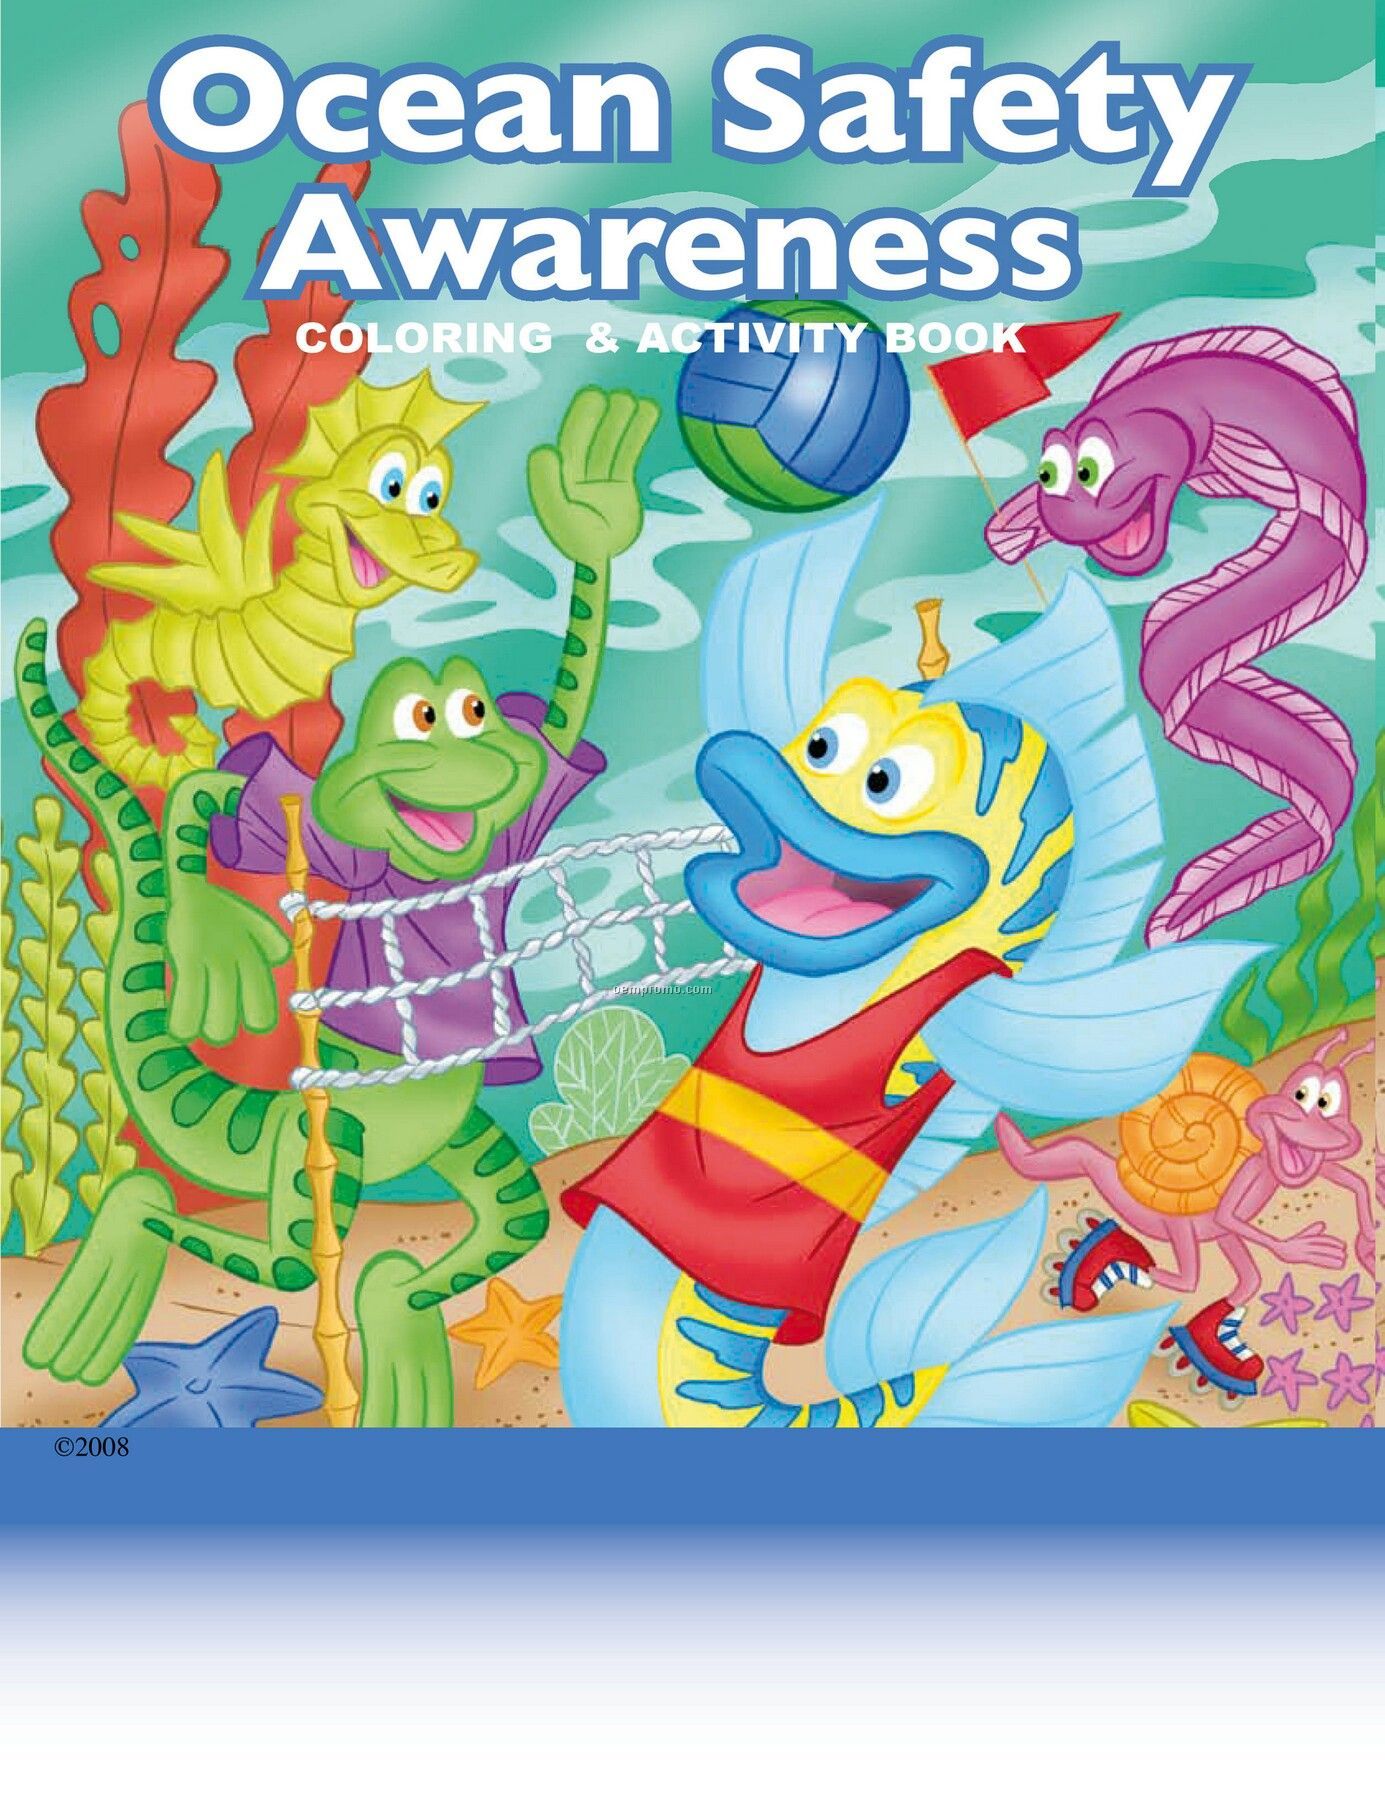 Ocean Safety Awareness Children's Coloring And Activity Book